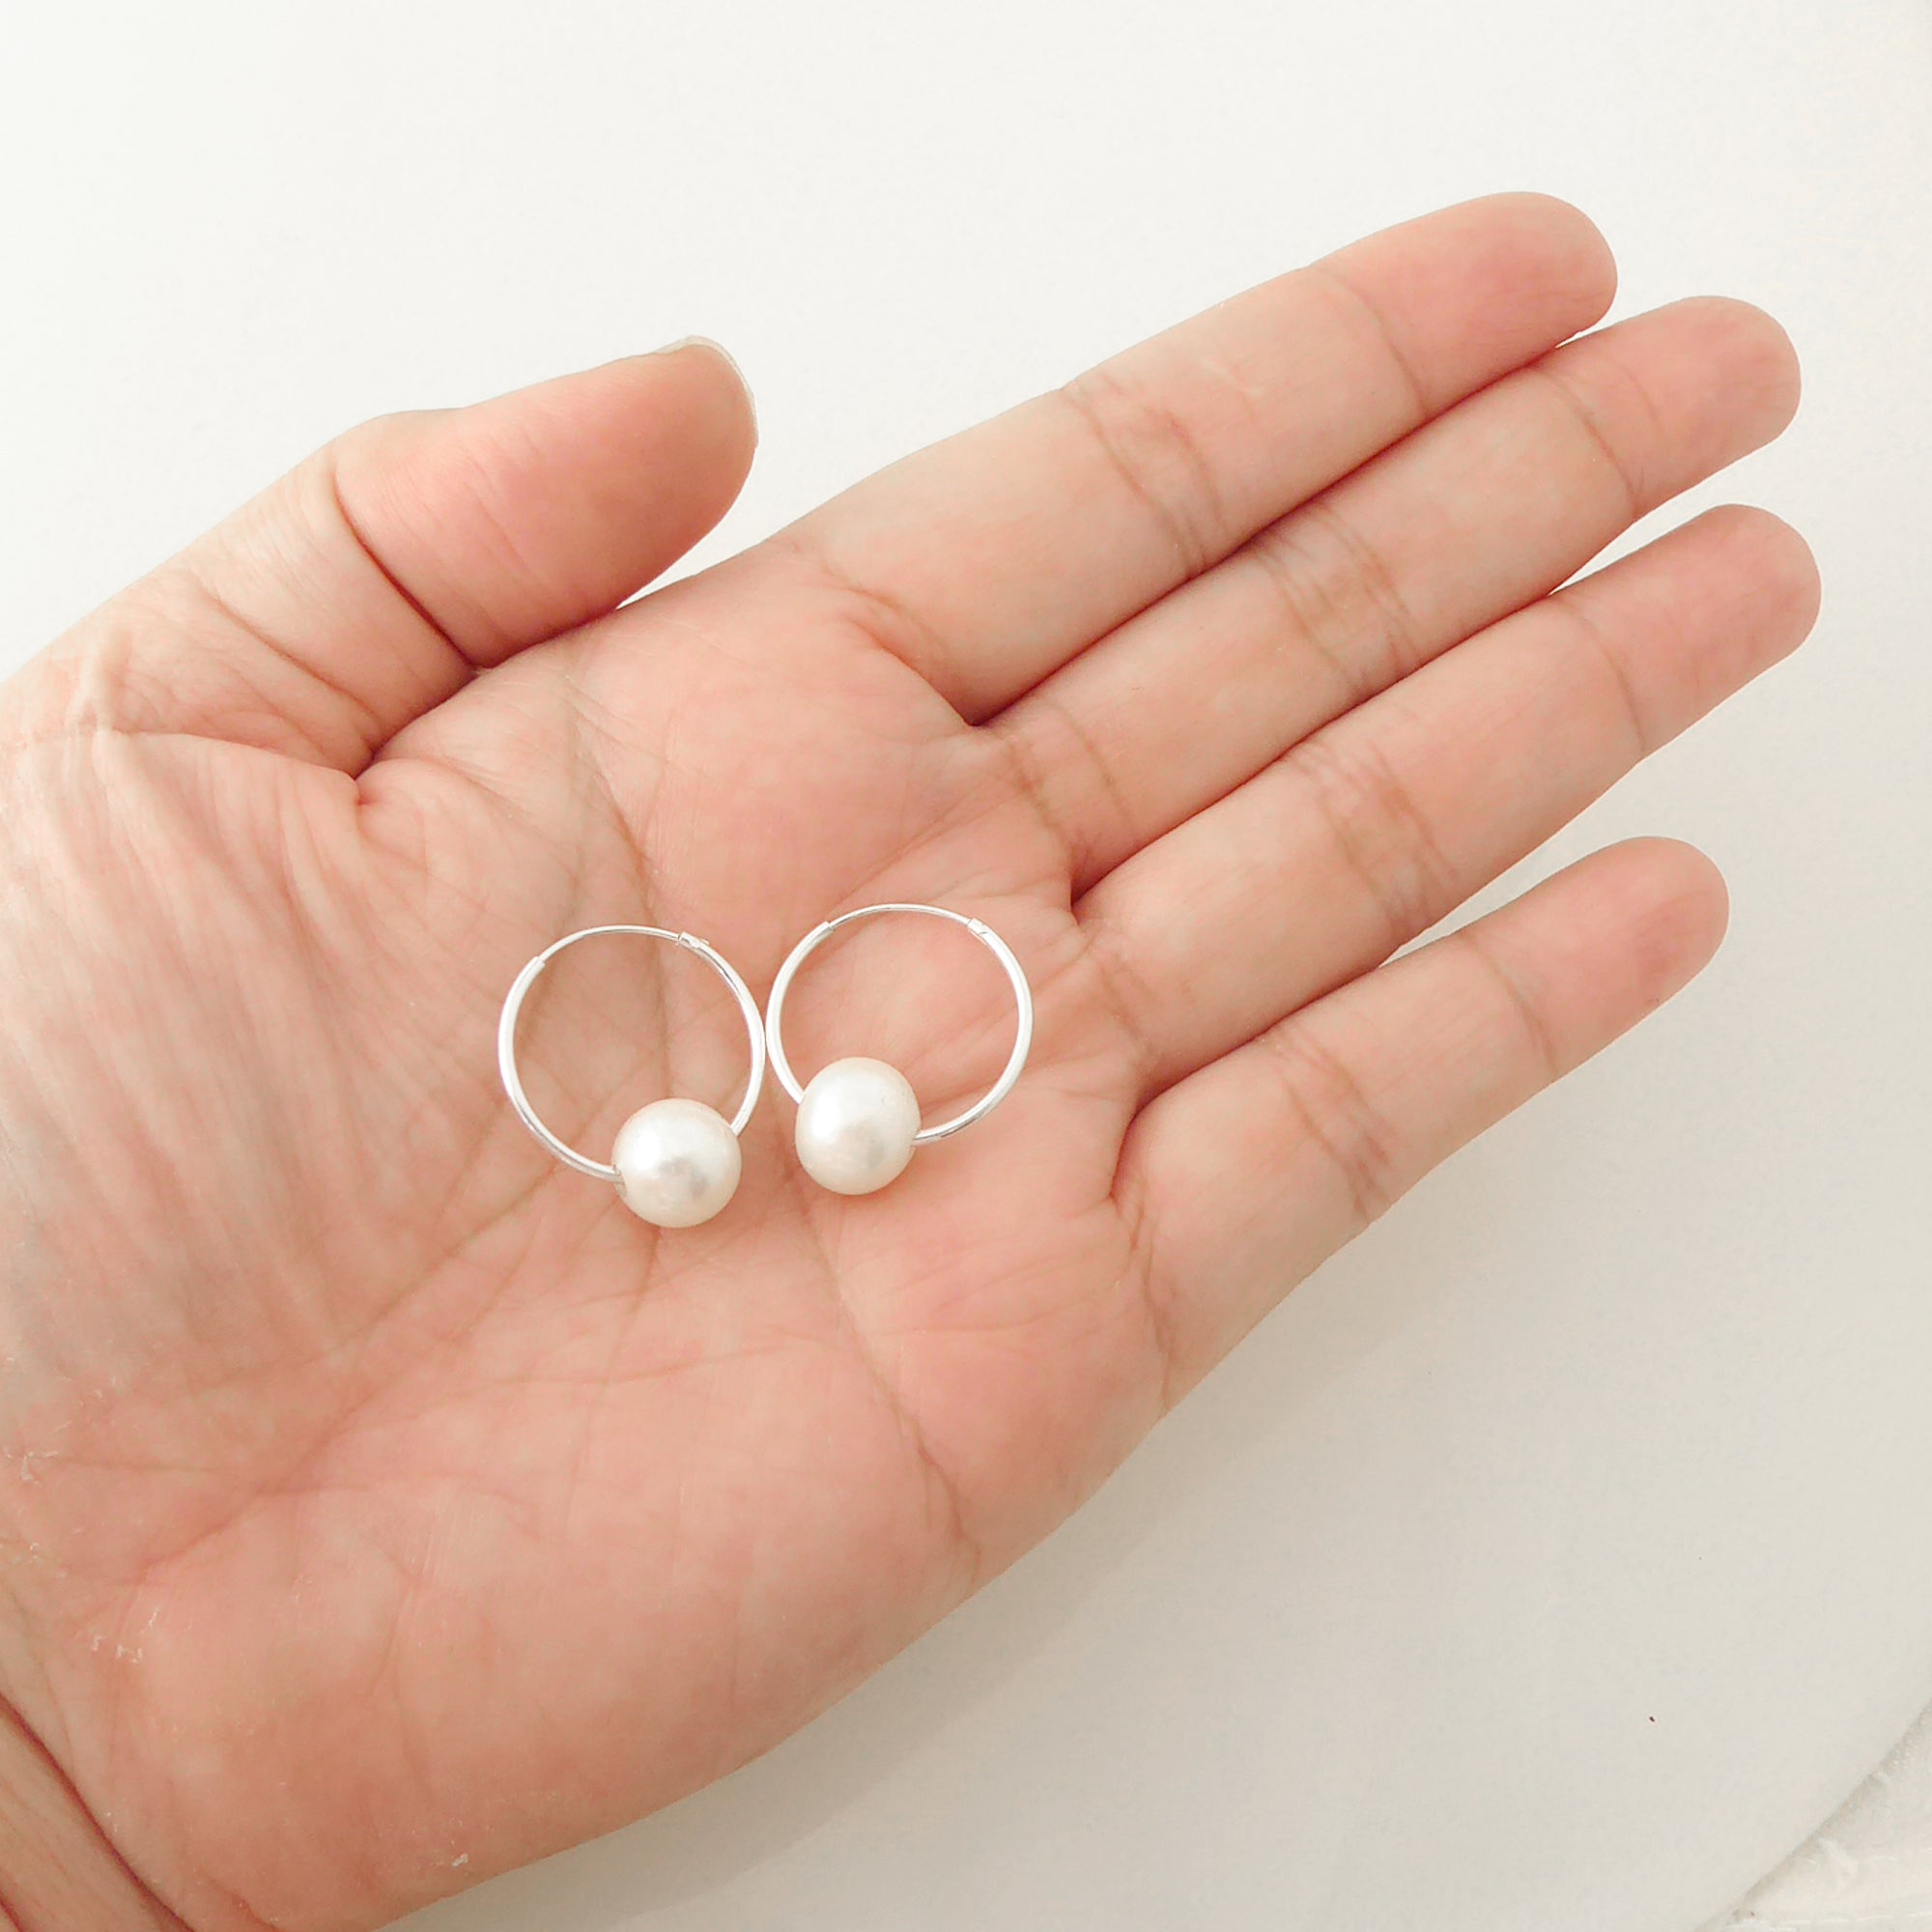 Small sterling silver hoop and pearl earrings by Jenny Dayco 4